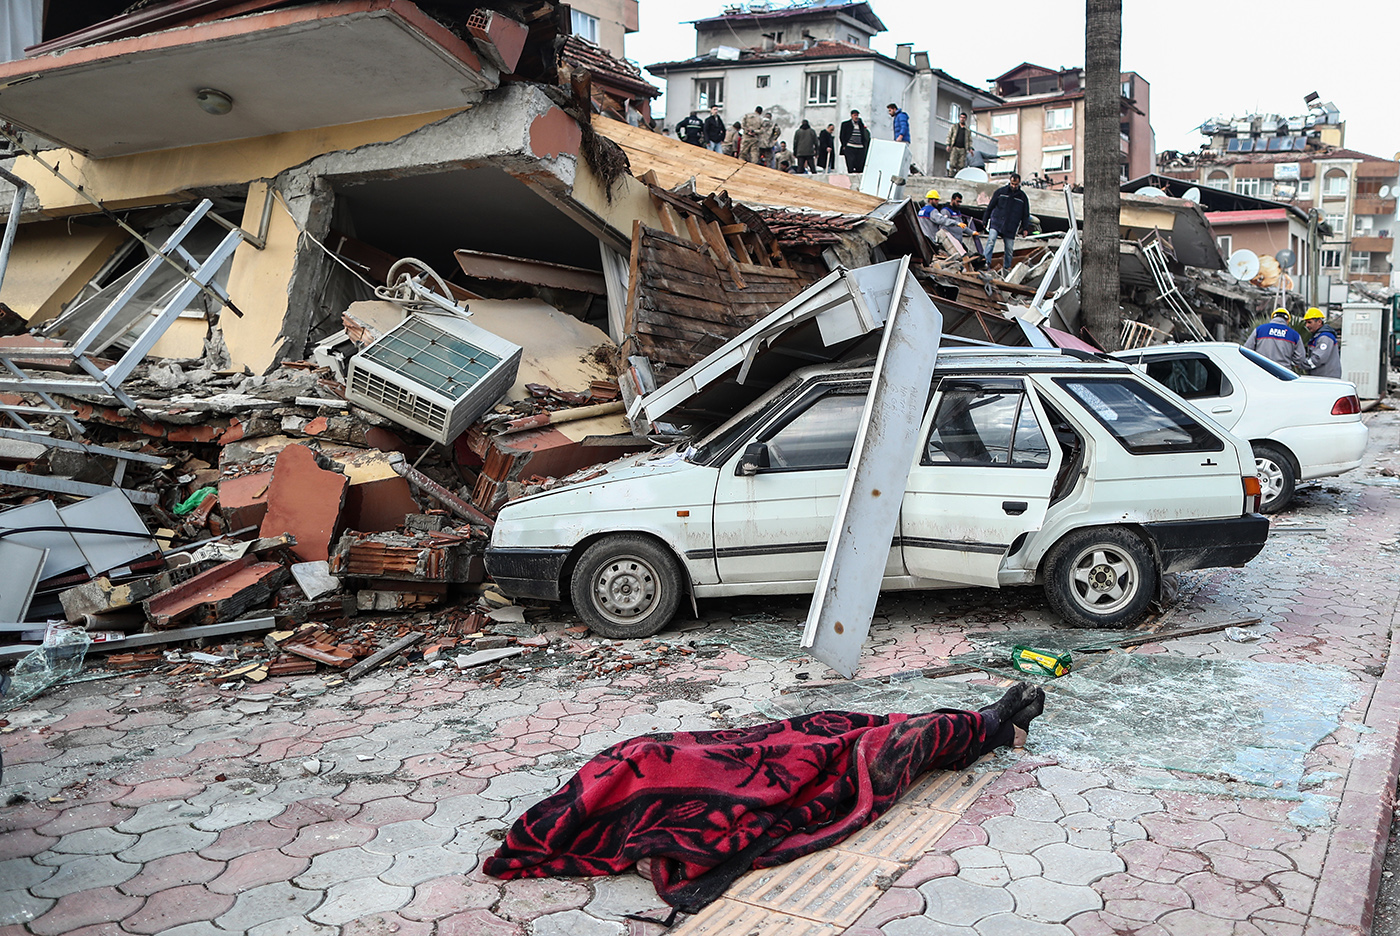 A body on the ground in front of a site of a collapsed building after an earthquake in Hatay, Turkey, 07 February 2023. According to the US Geological Service, an earthquake with a preliminary magnitude of 7.8 struck southern Turkey close to the Syrian border. The earthquake caused buildings to collapse and sent shockwaves over northwest Syria, Cyprus, and Lebanon. Thousands of people have died and more than seven thousand have been injured in Turkey, according to AFAD, Turkish Disaster and Emergency Management Presidency.